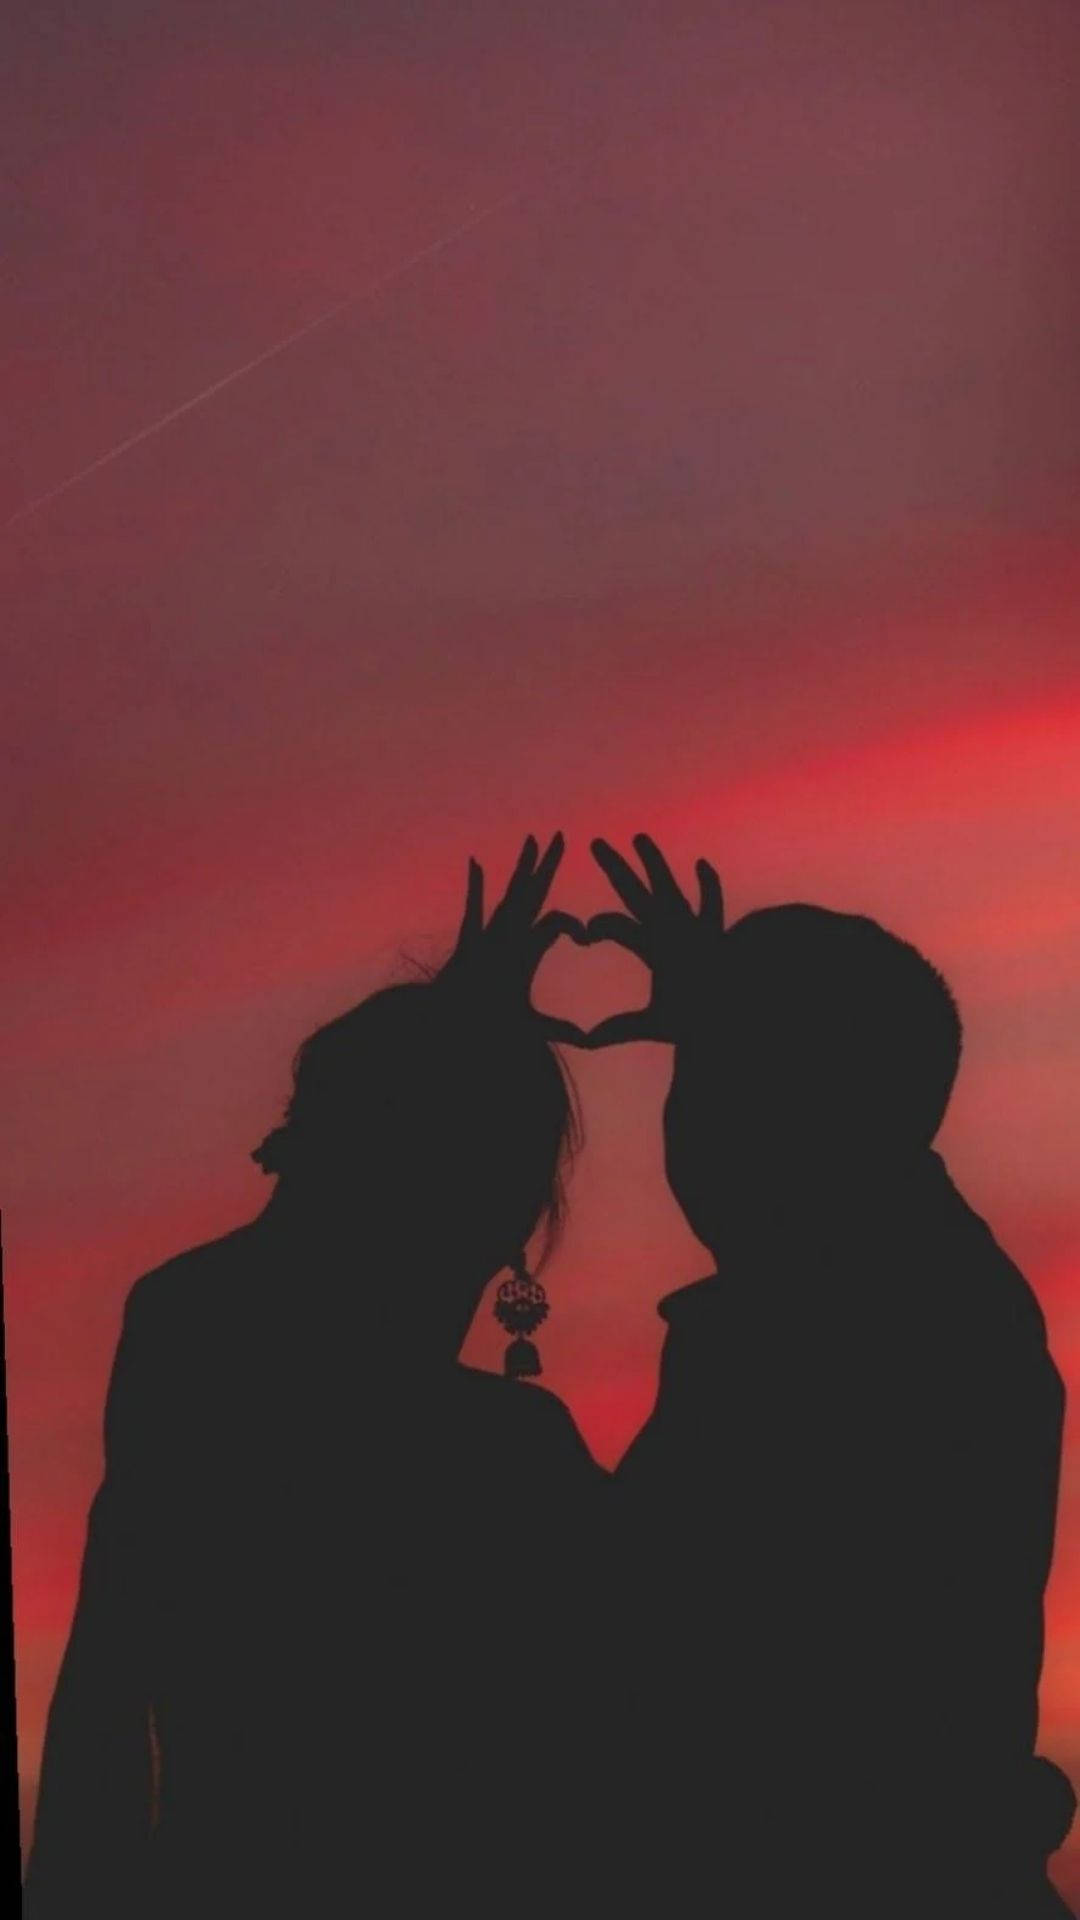 Aesthetic Couple With Red Sky Wallpaper